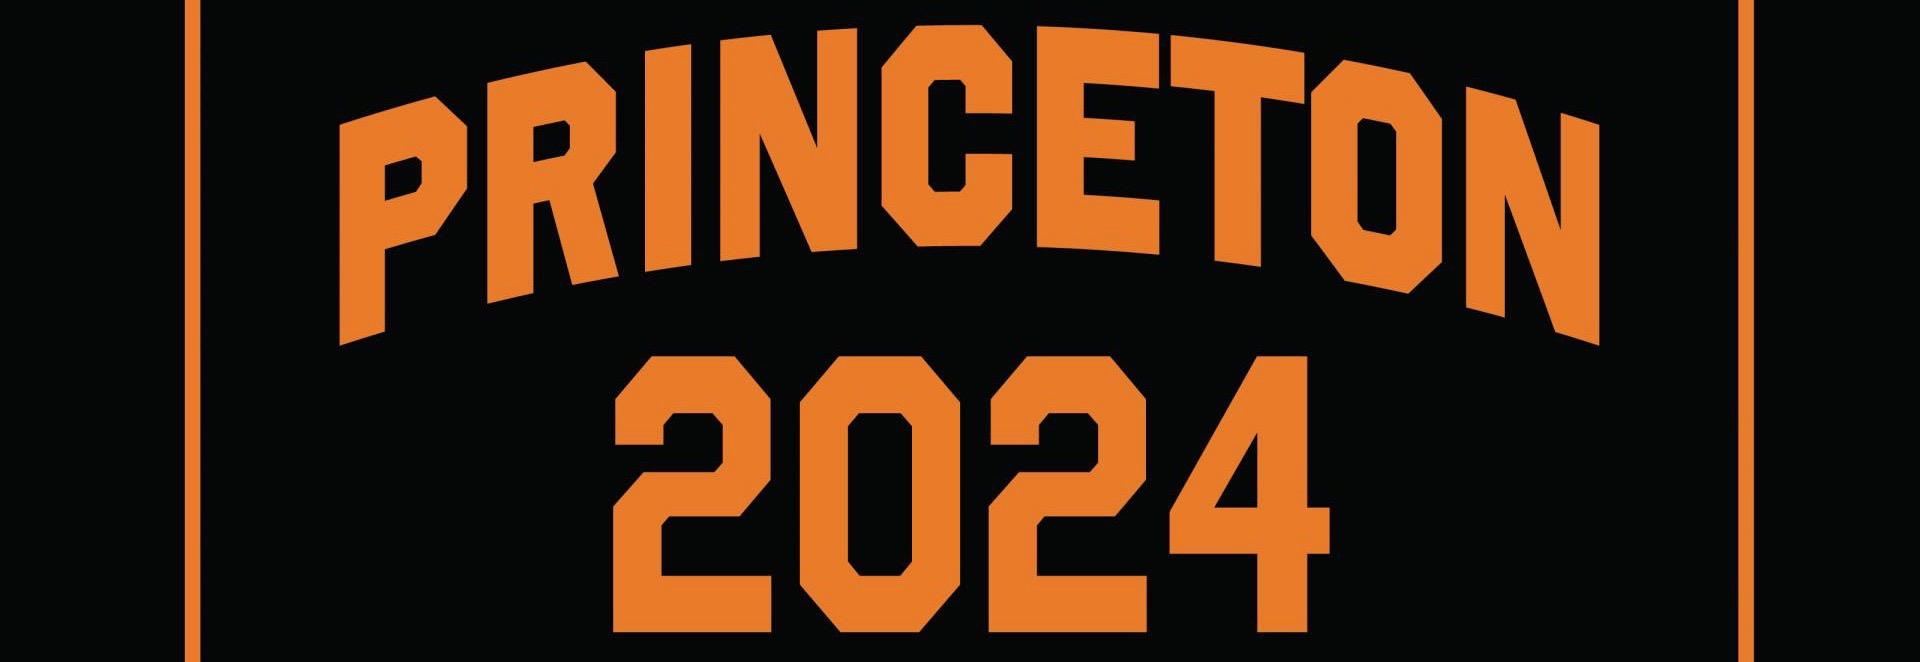 Princeton offers early action admission to 791 students for Class of